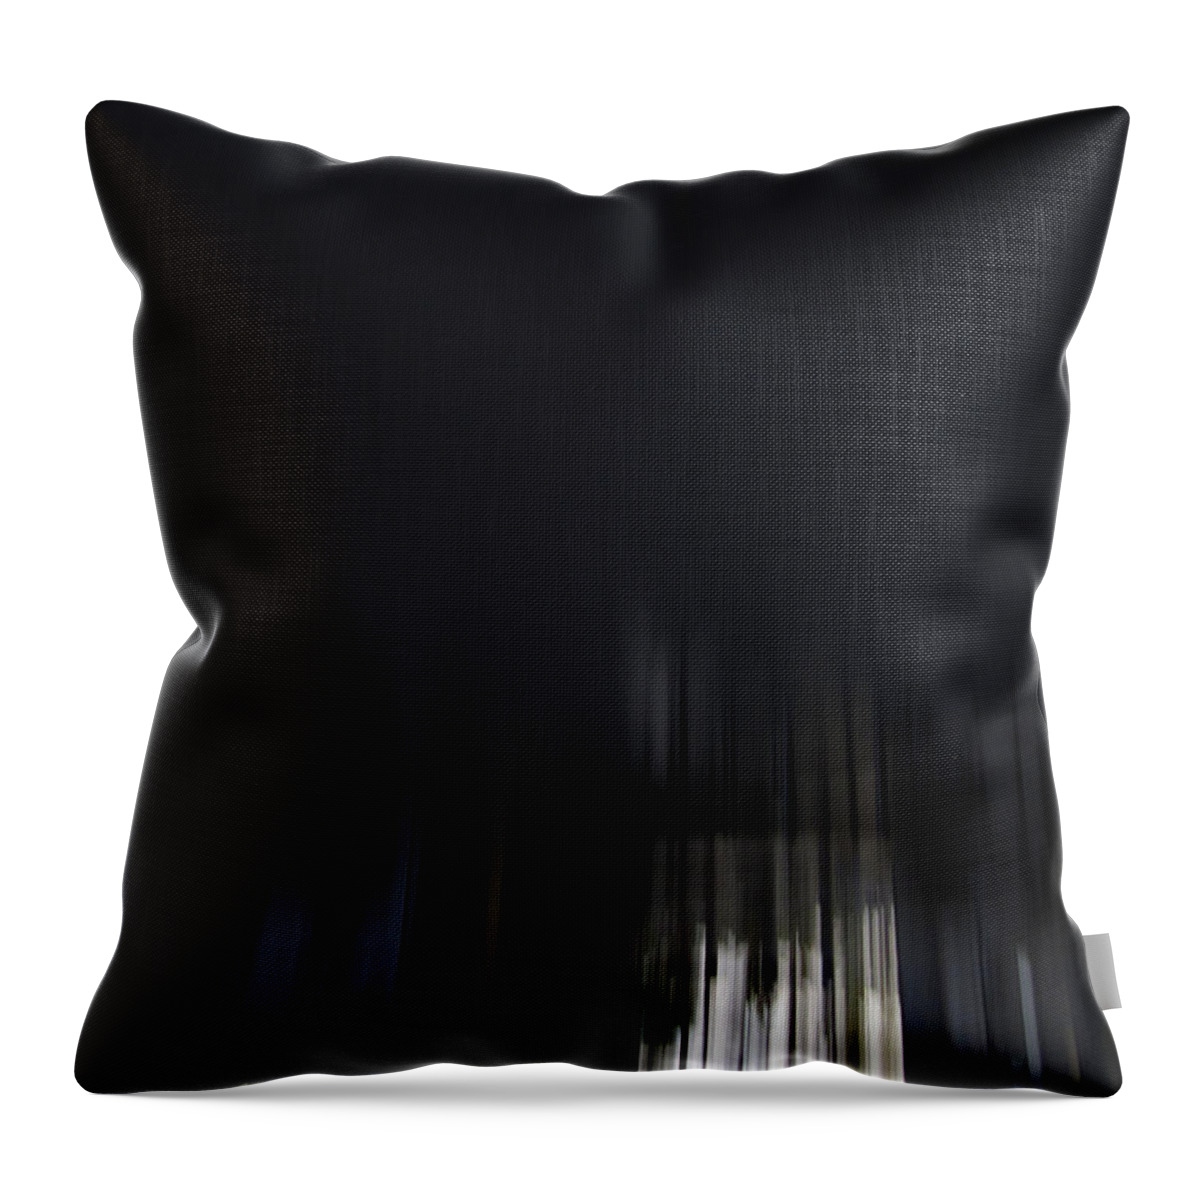 Transformation Throw Pillow featuring the photograph Transformative Space Series No.1 by Ingrid Van Amsterdam